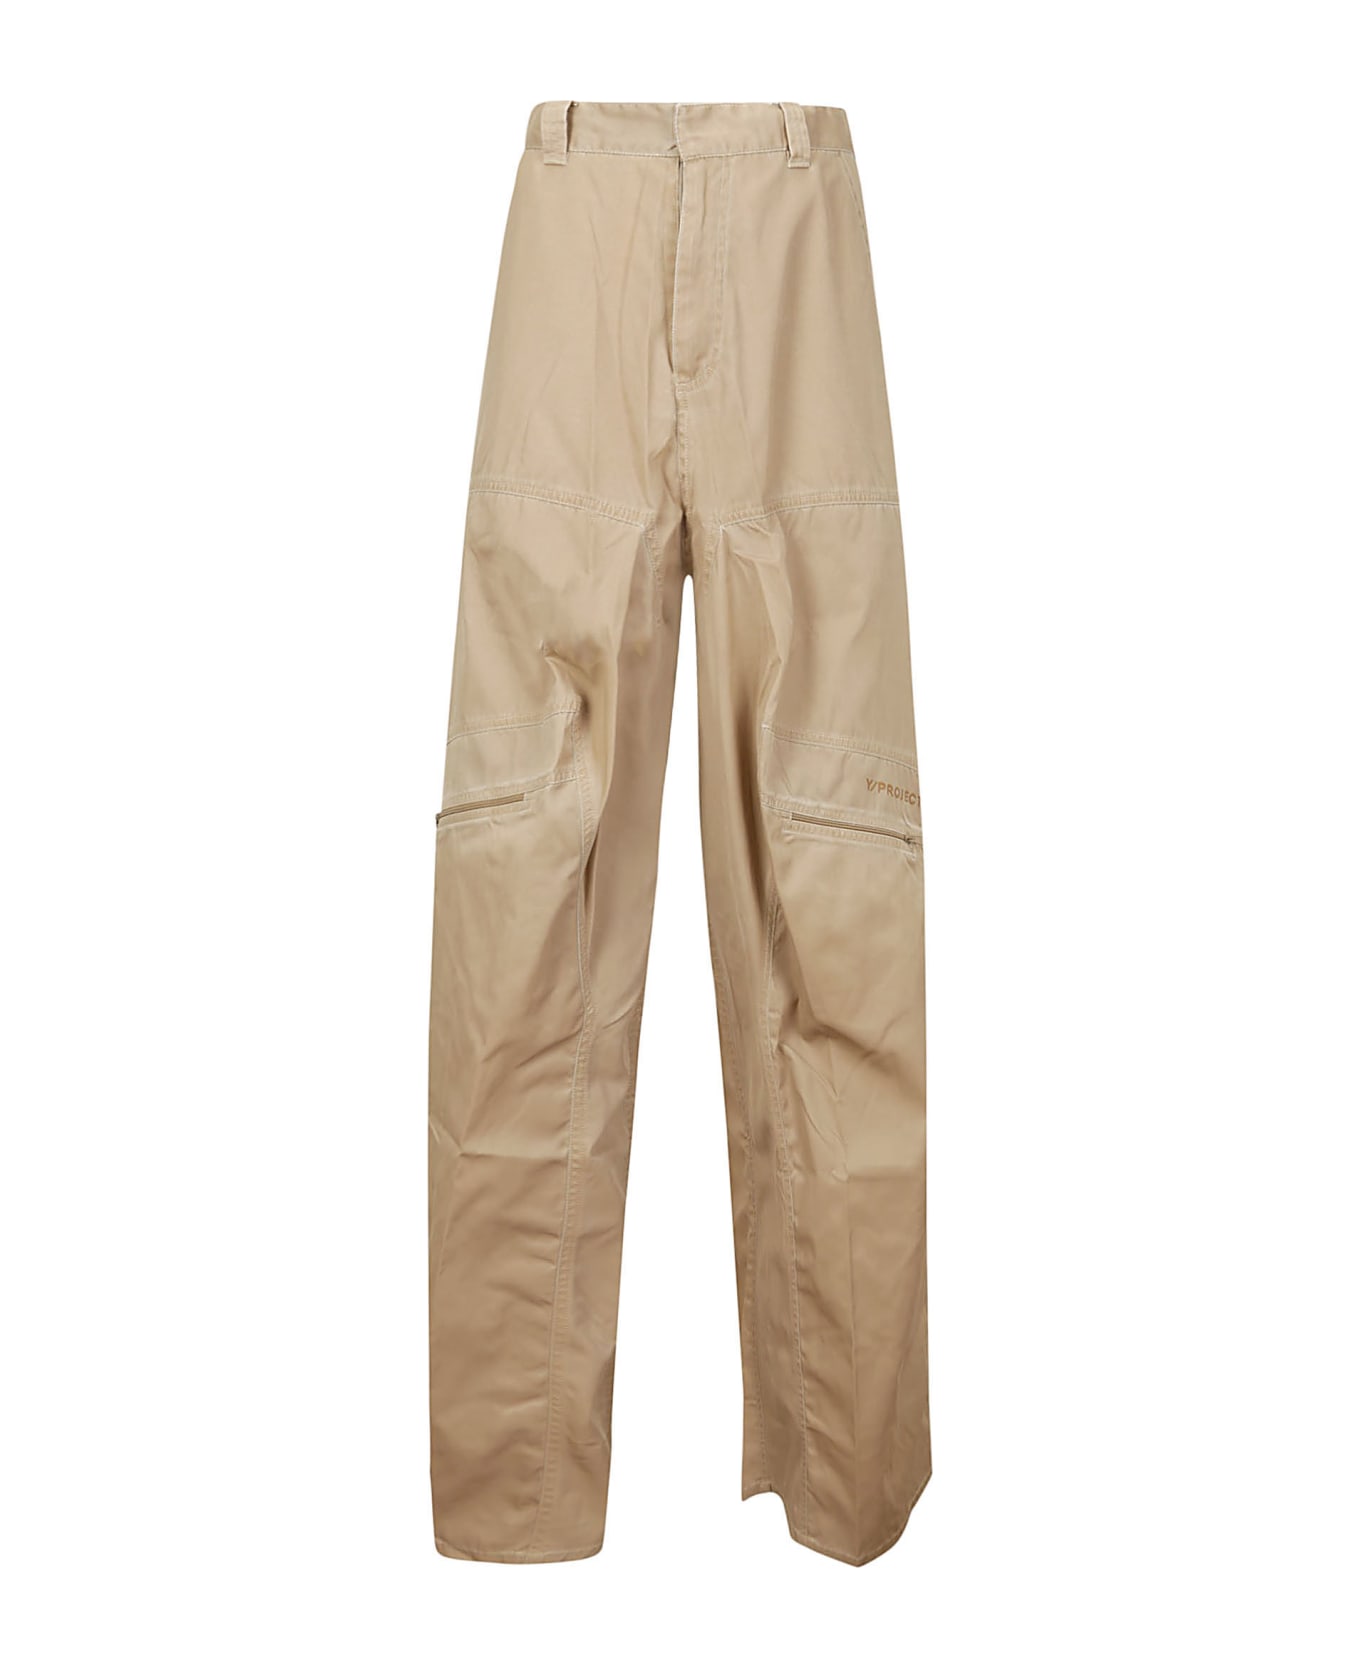 Y/Project Pop-up Pants - WASHED BEIGE